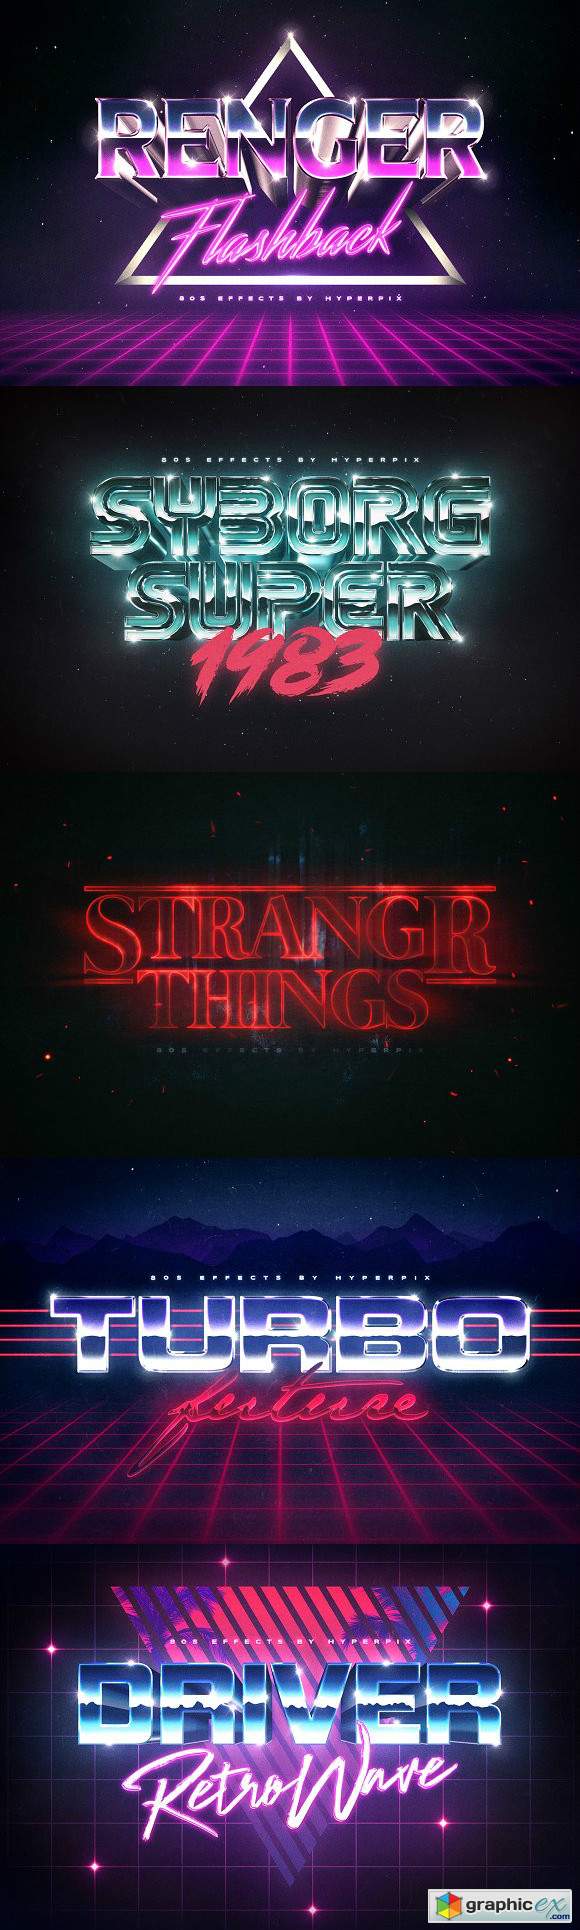 80s Text Effects Vol3